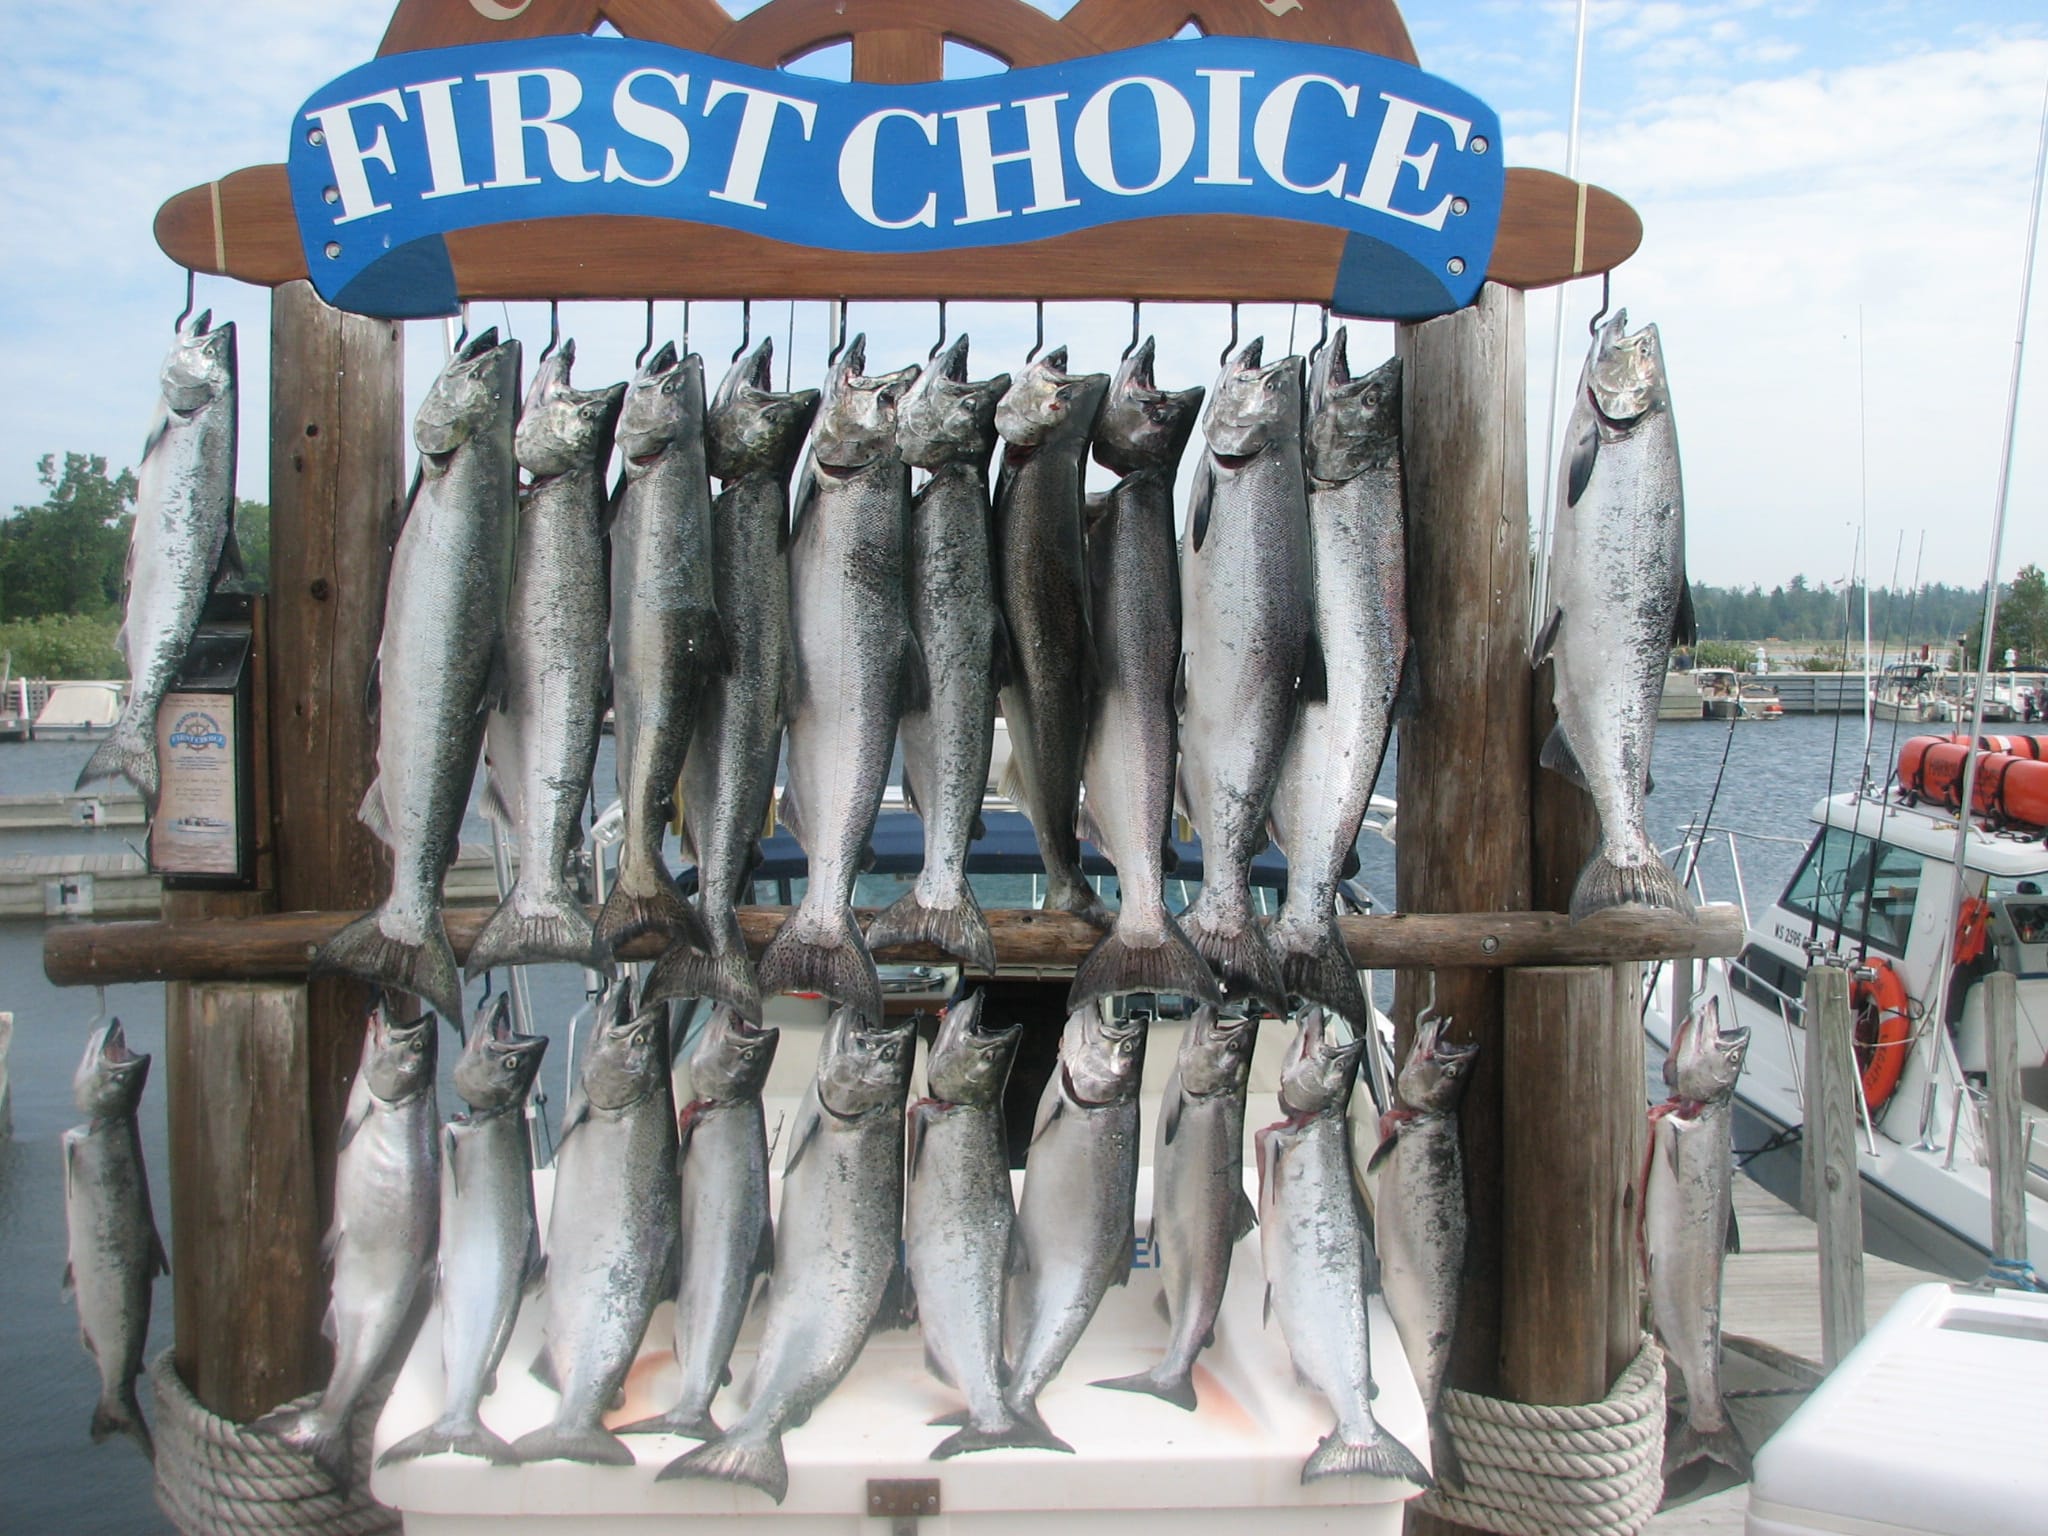 First Choice Charter Fishing in Door County hauls in several salmon and steelhead